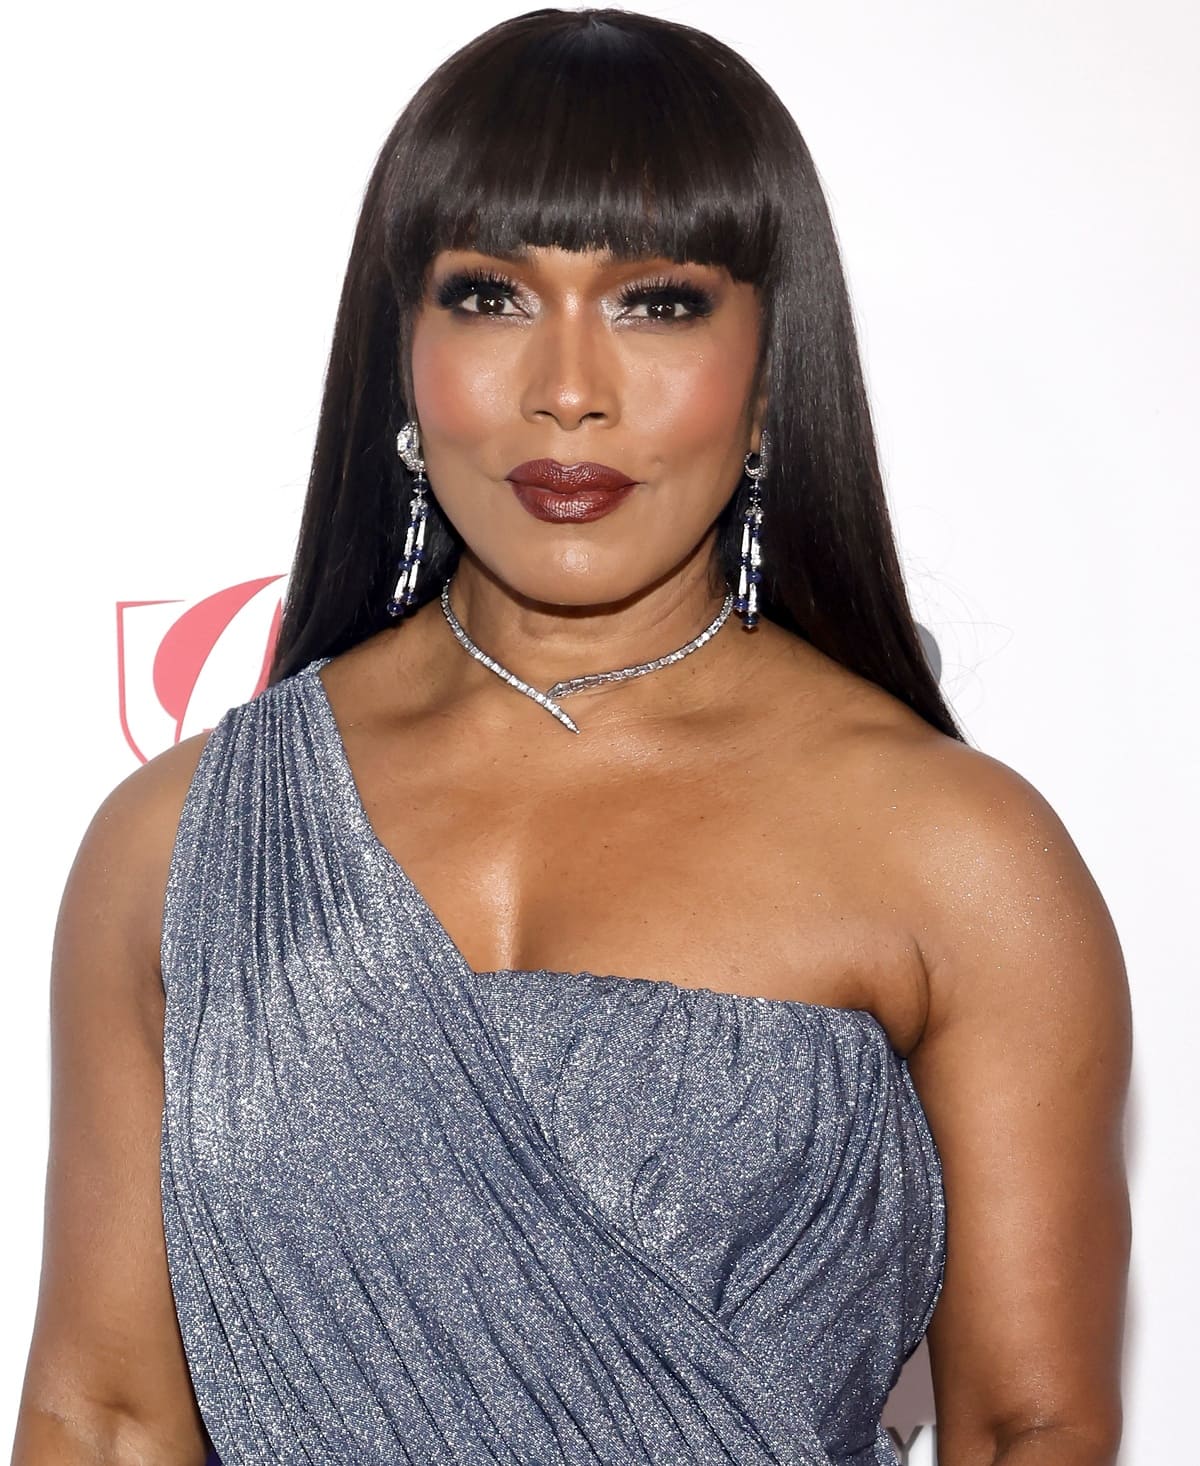 Angela Bassett’s beauty look consisted of a long raven-fringed wig, flawless makeup, and Bulgari jewels